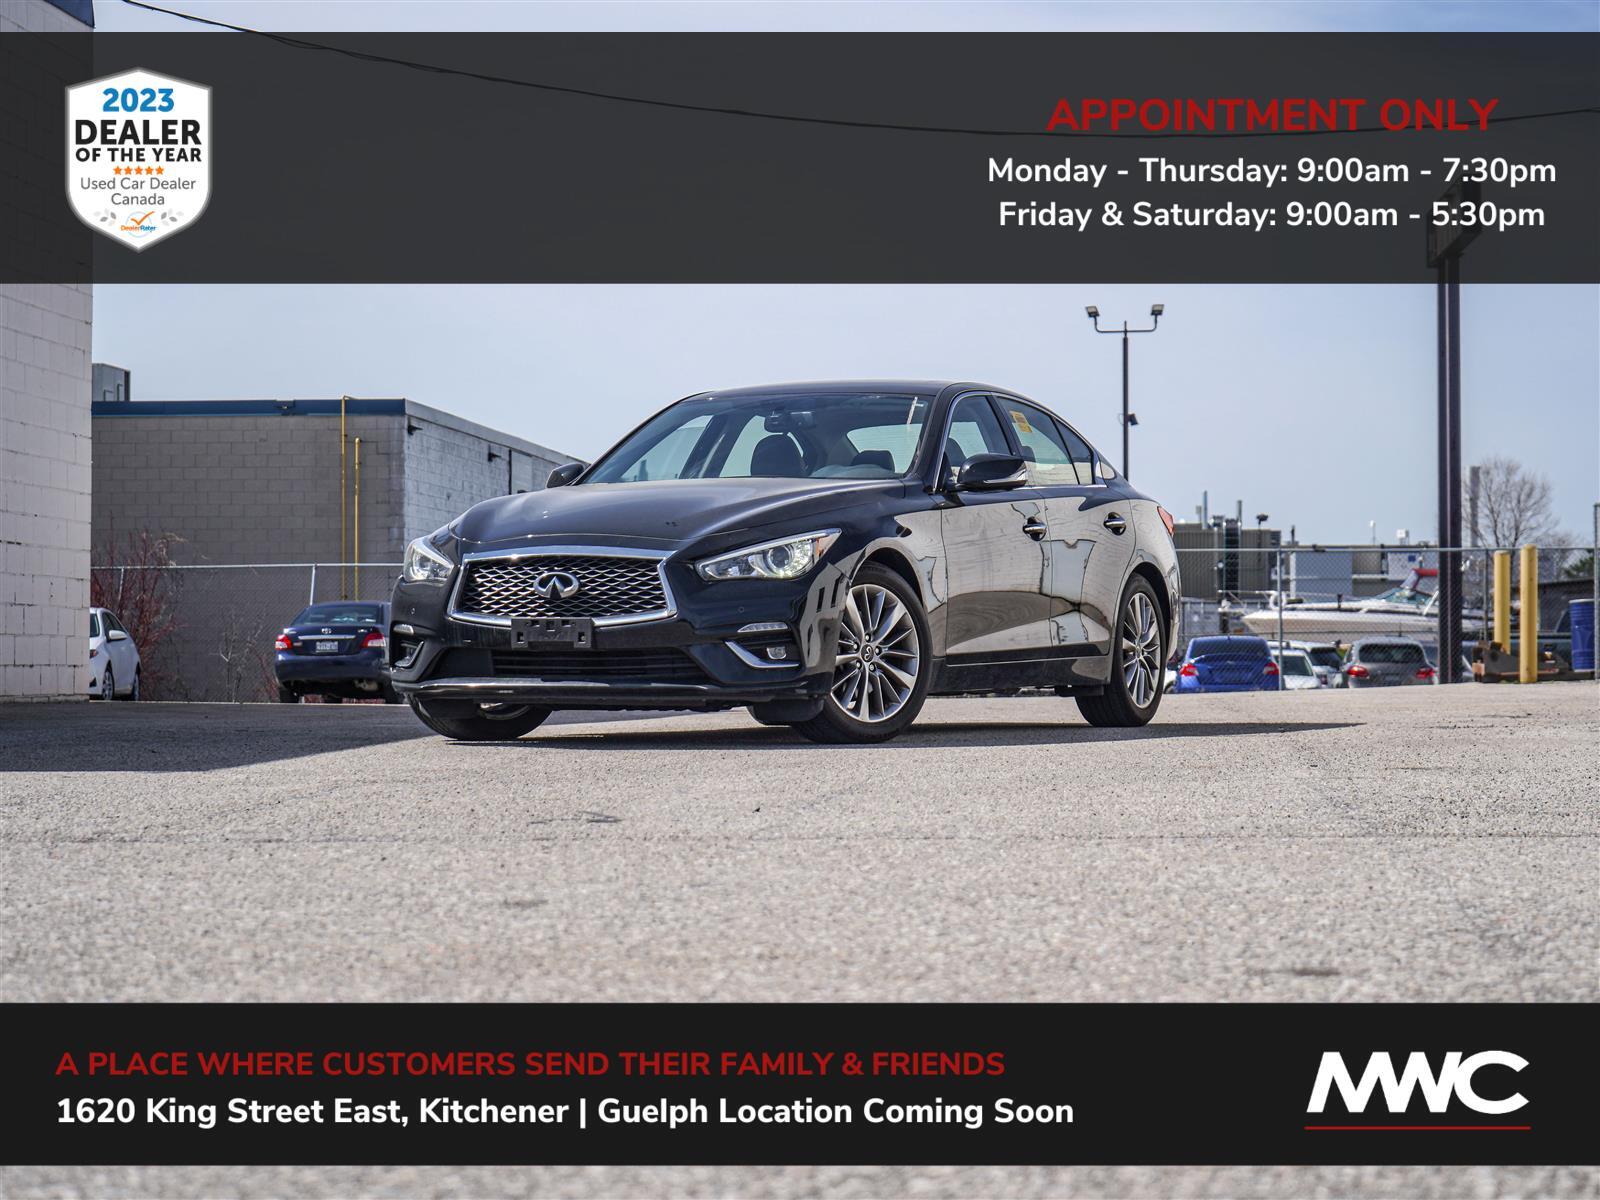 2022 Infiniti Q50 LUXURY | IN GUELPH, BY APPT. ONLY